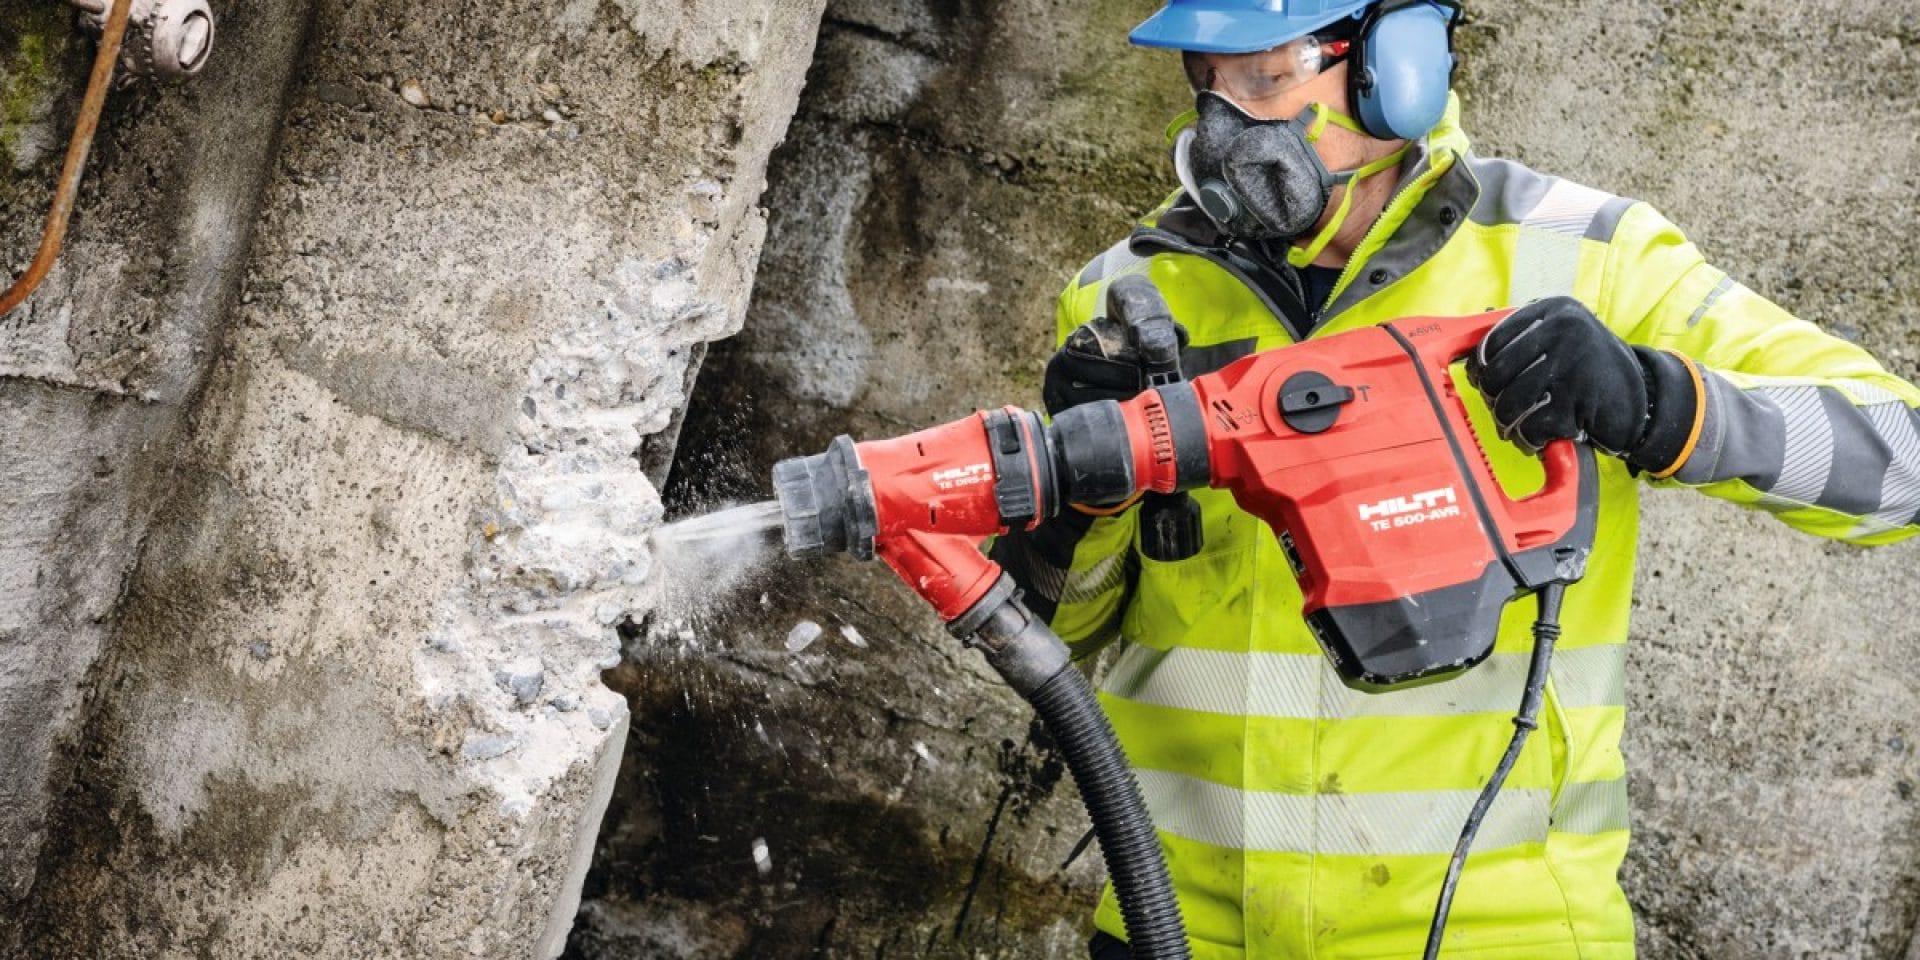 TE 500-AVR Wall breaker with Hilti Dust Removal System